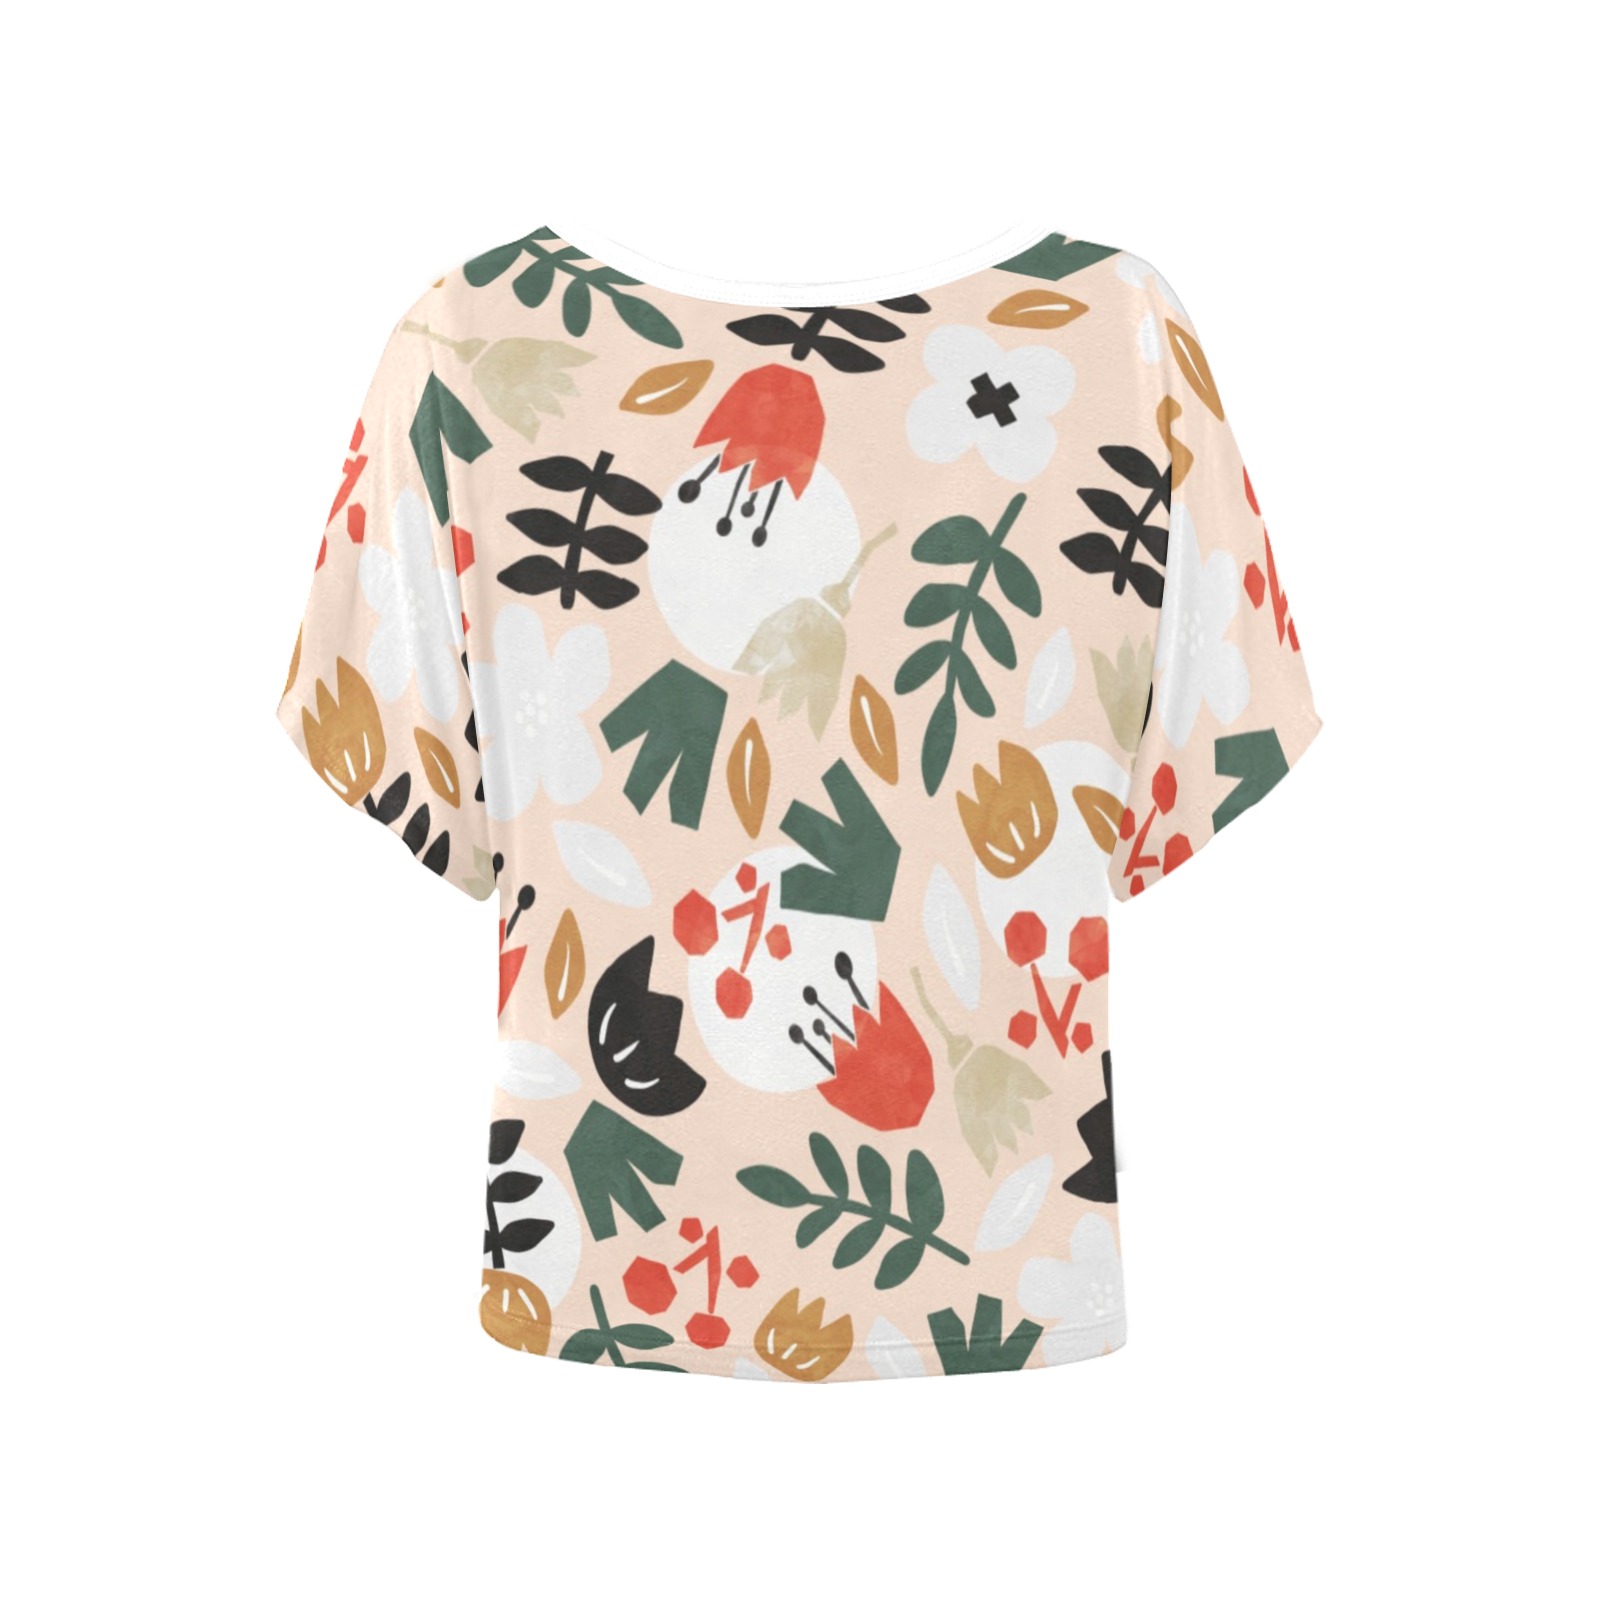 Modern floral shapes 71 Women's Batwing-Sleeved Blouse T shirt (Model T44)